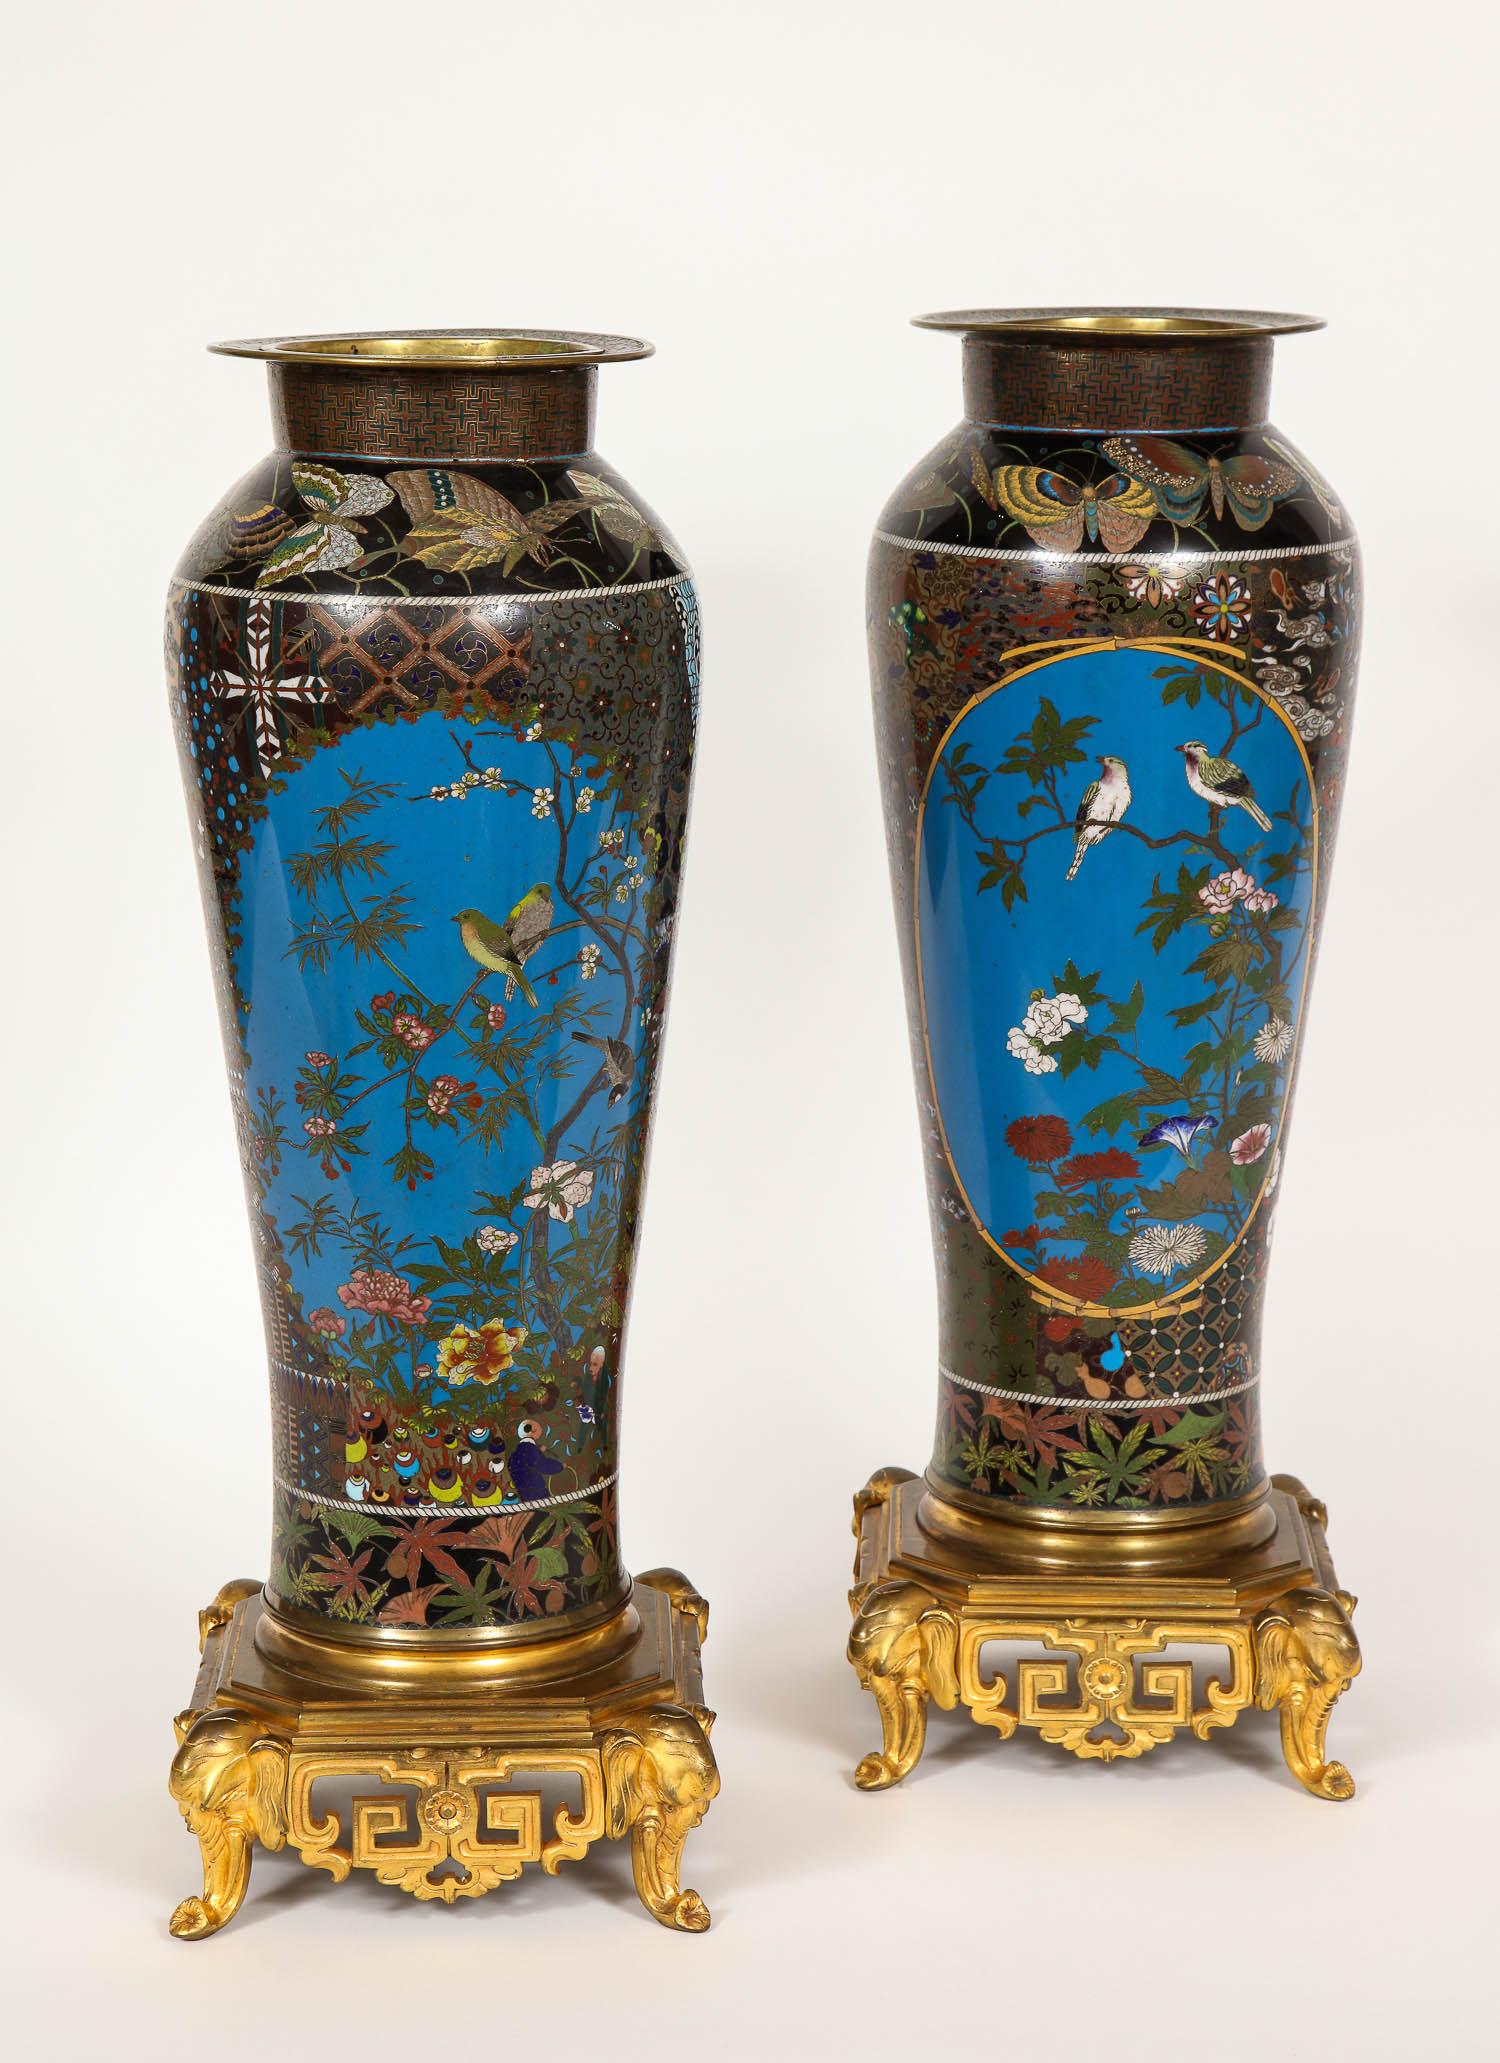 Pair of Meji Period Japanese Cloisonne Thousand Butterfly Vases, Barbedienne 1